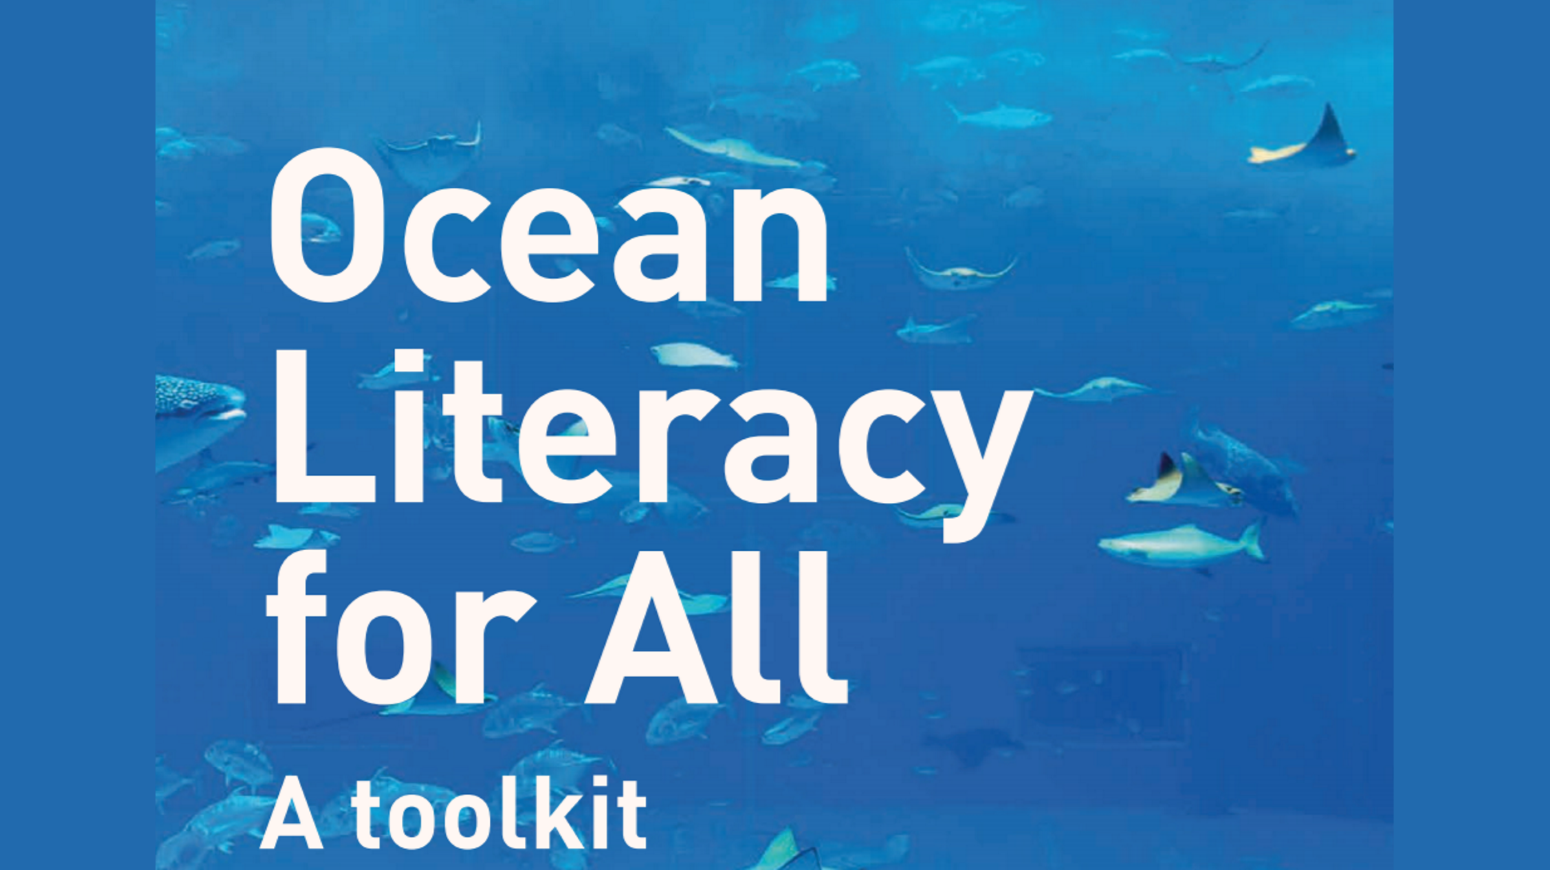 Ocean Literacy for all: a toolkit